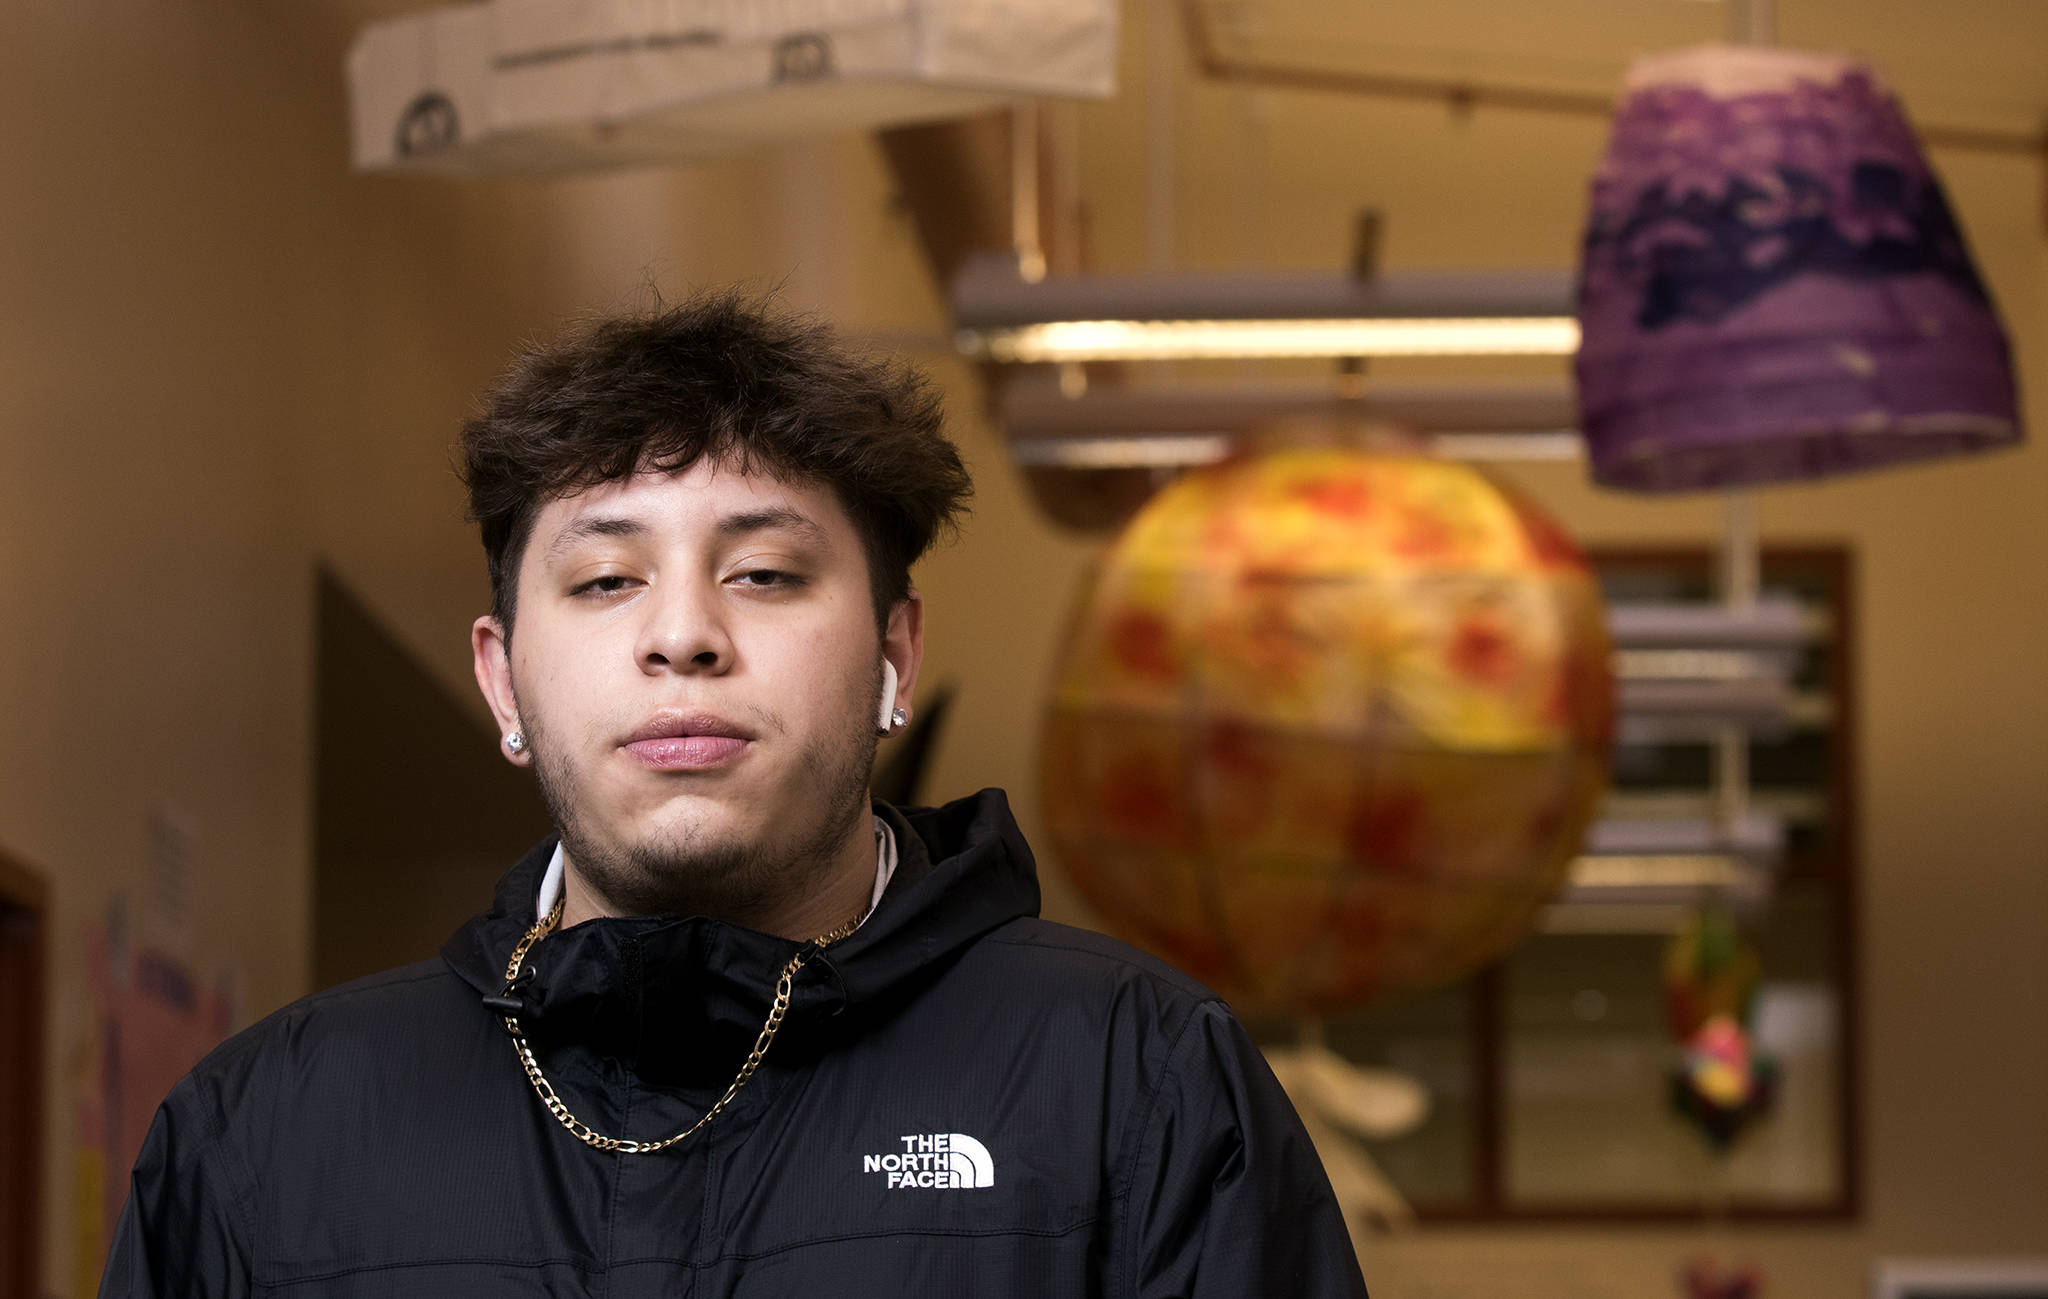 Armando Anguiano-Escutia, 17, is on track to graduate from ACES High School in Everett this year. After falling behind on credits, he enrolled at the alternative school in the Mukilteo School District his sophomore year and found motivation to catch up. (Andy Bronson / The Herald)